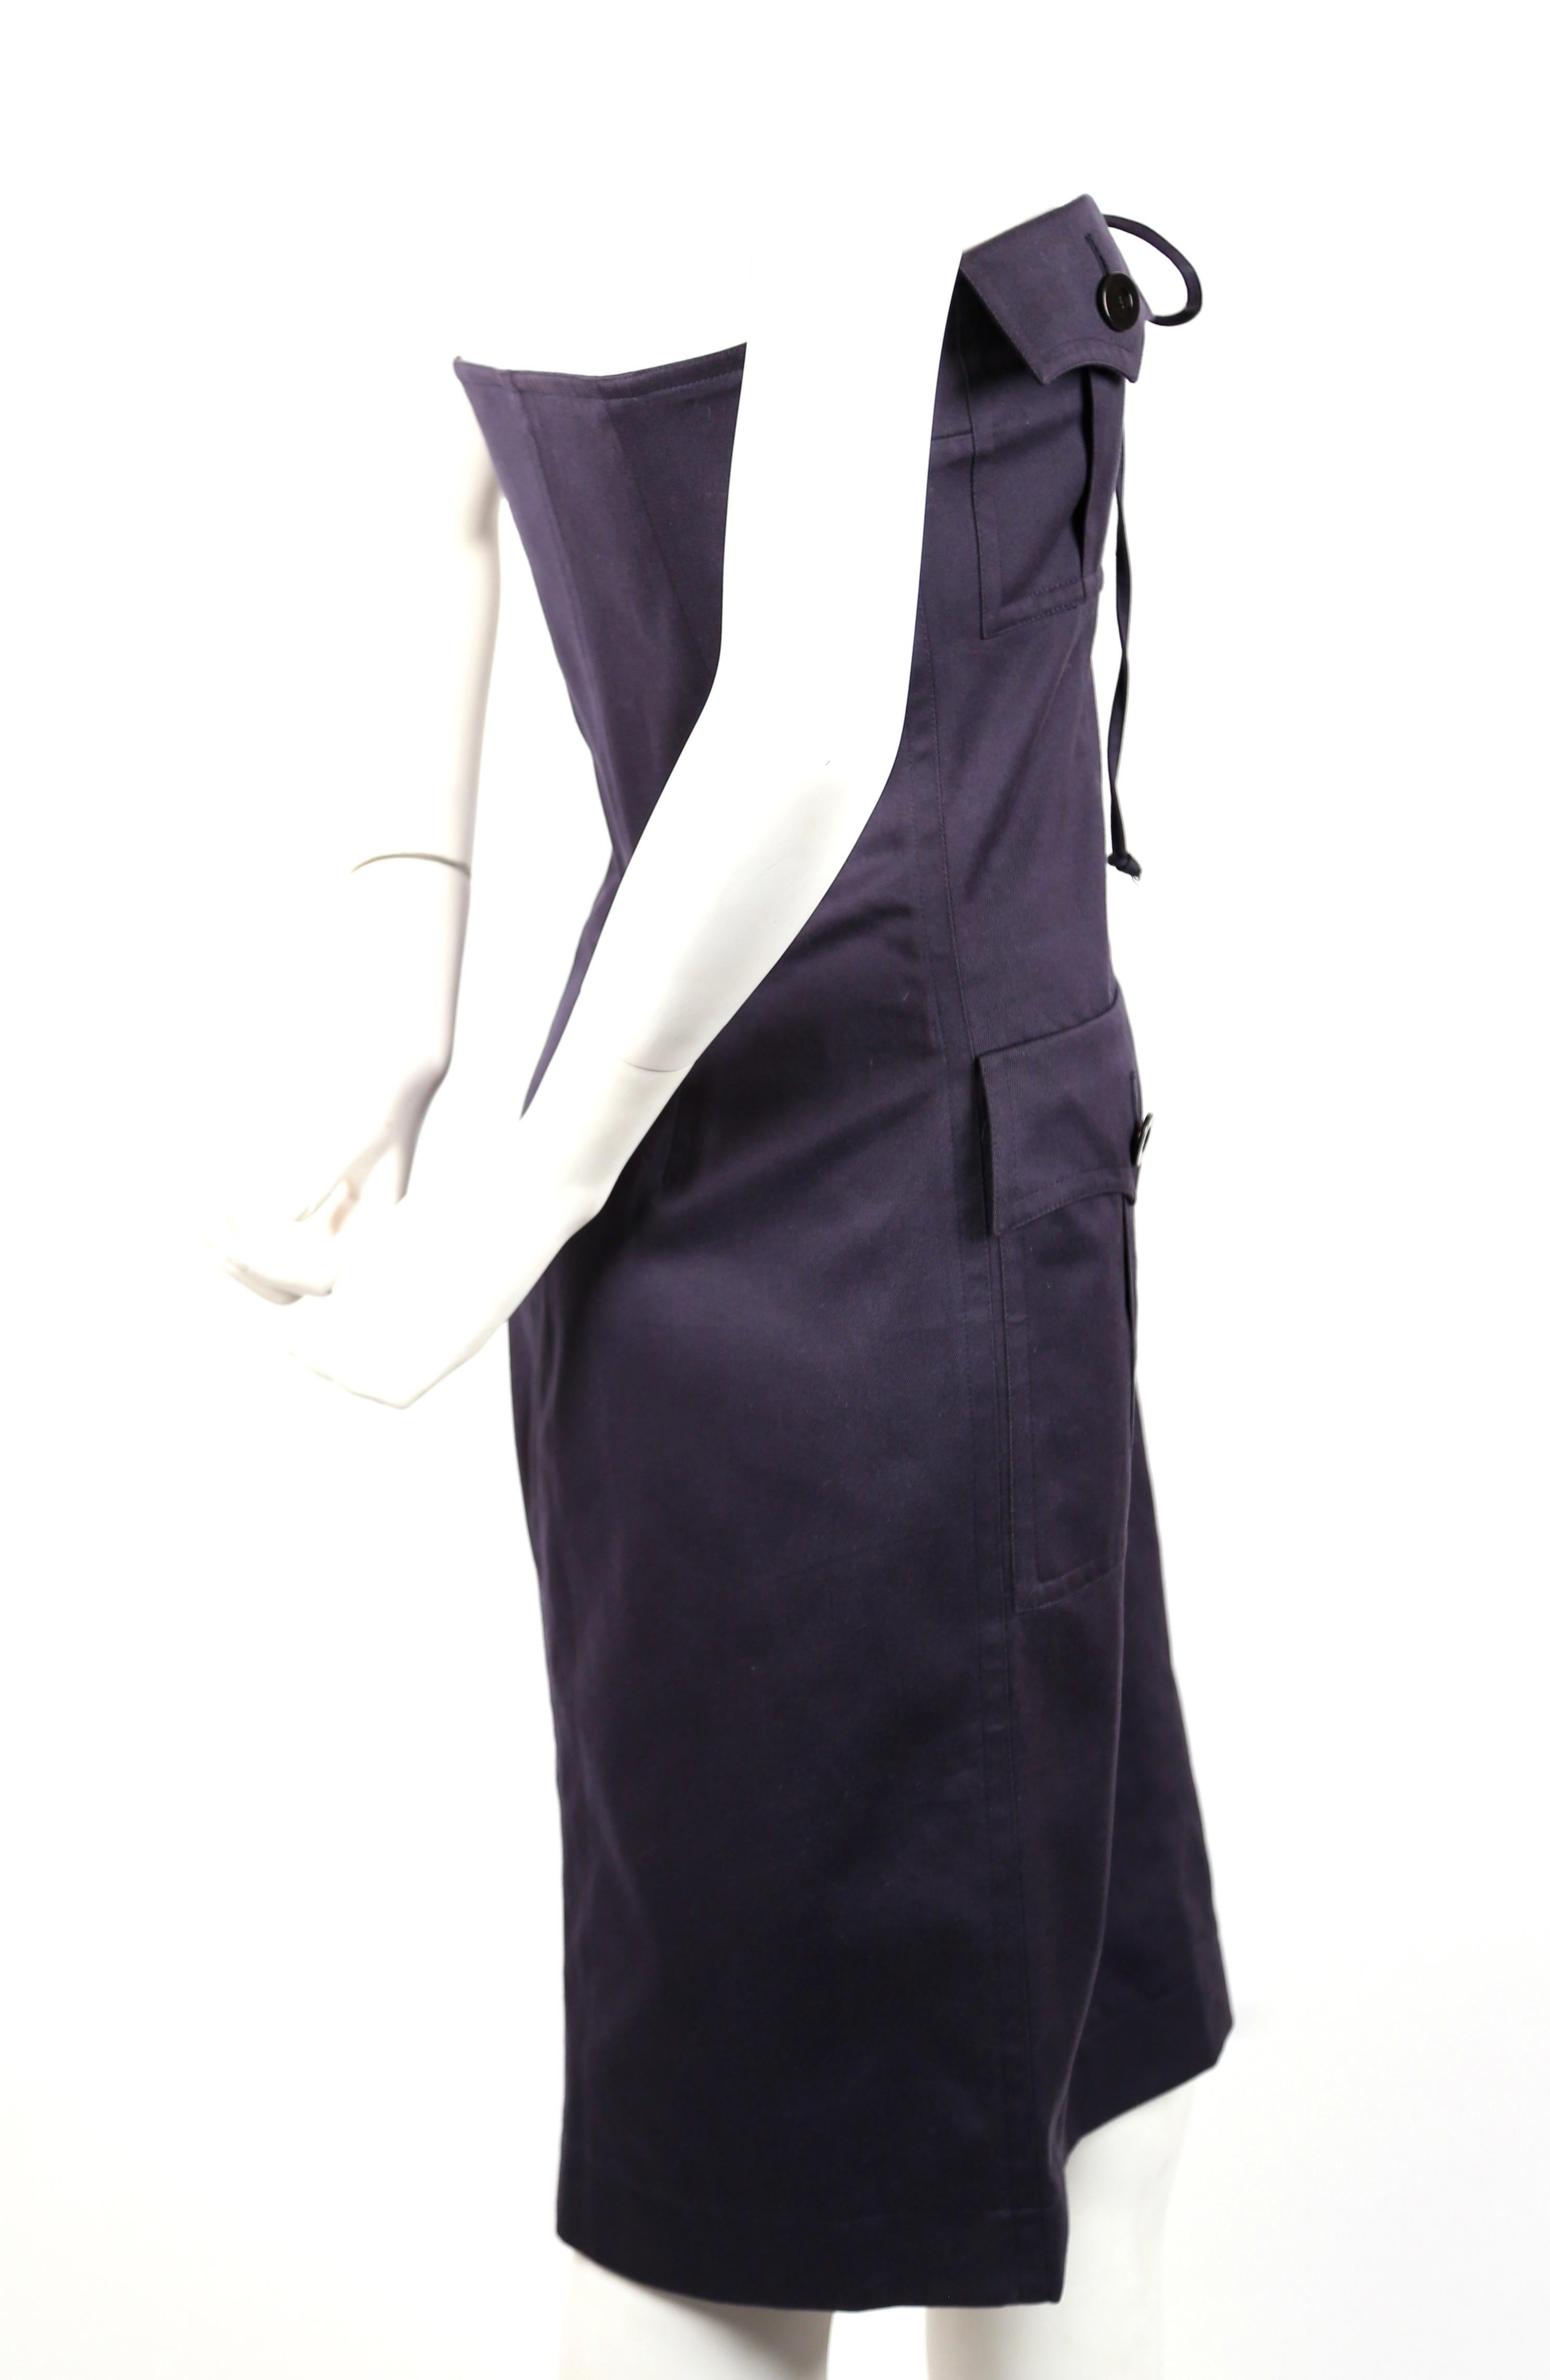 Navy blue, strapless, cotton, safari dress designed by Yves Saint Laurent dating to the early 1990's. French size 38. Best fits a US 2 or small-busted 4. Dress can be adjusted with ties but is best for a 31-33